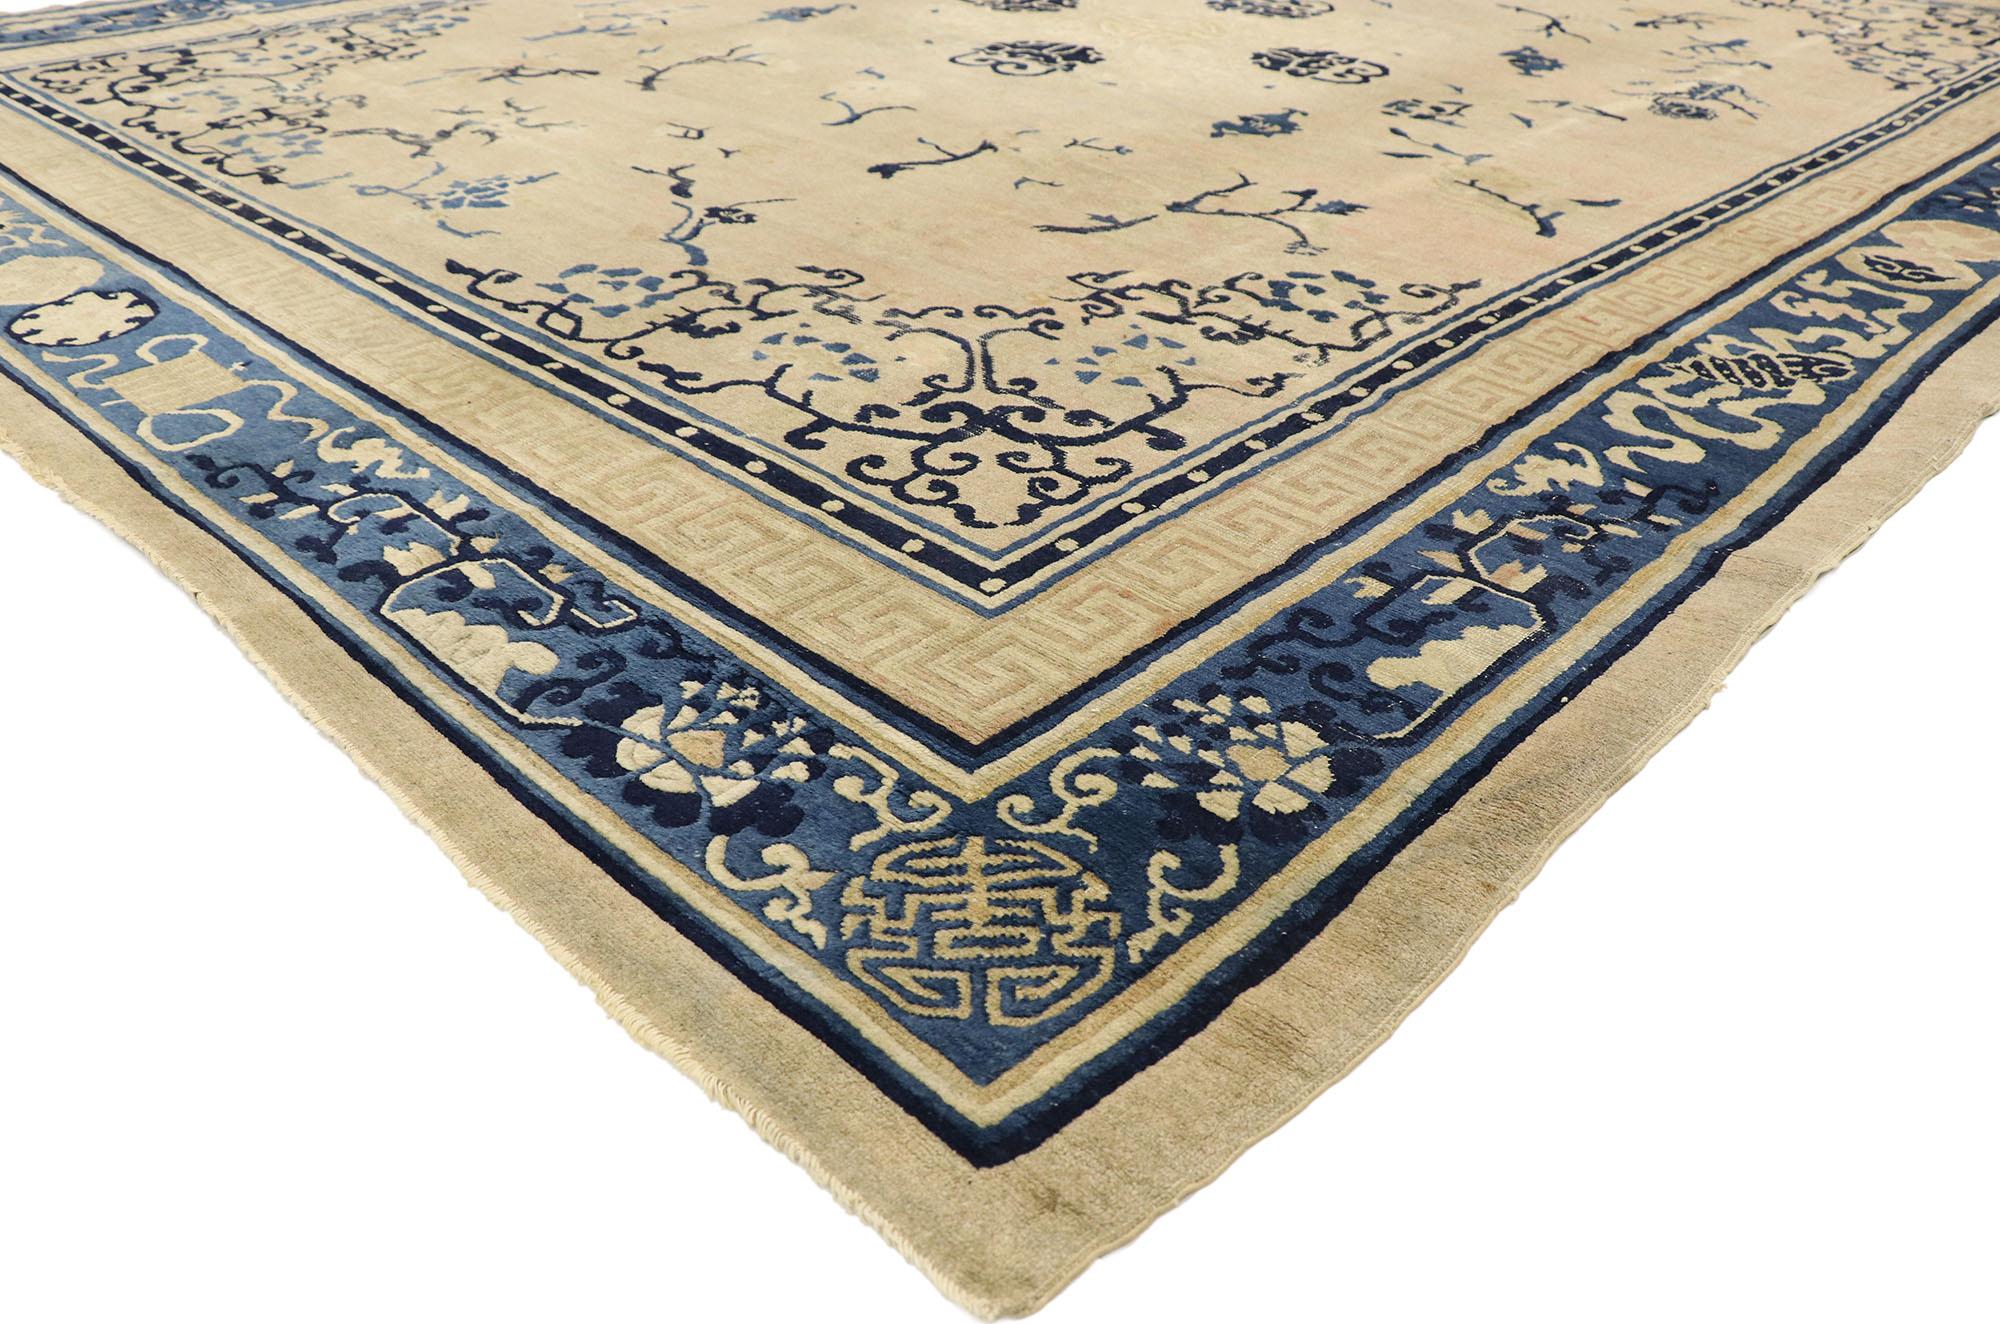 72991 Antique Chinese Peking Rug with Chinoiserie Style. Framed by an intricate blue border, this antique rug boasts a classic blue chinoiserie design that will never go out of style. The scattered tree branches meander in a compelling harmony,